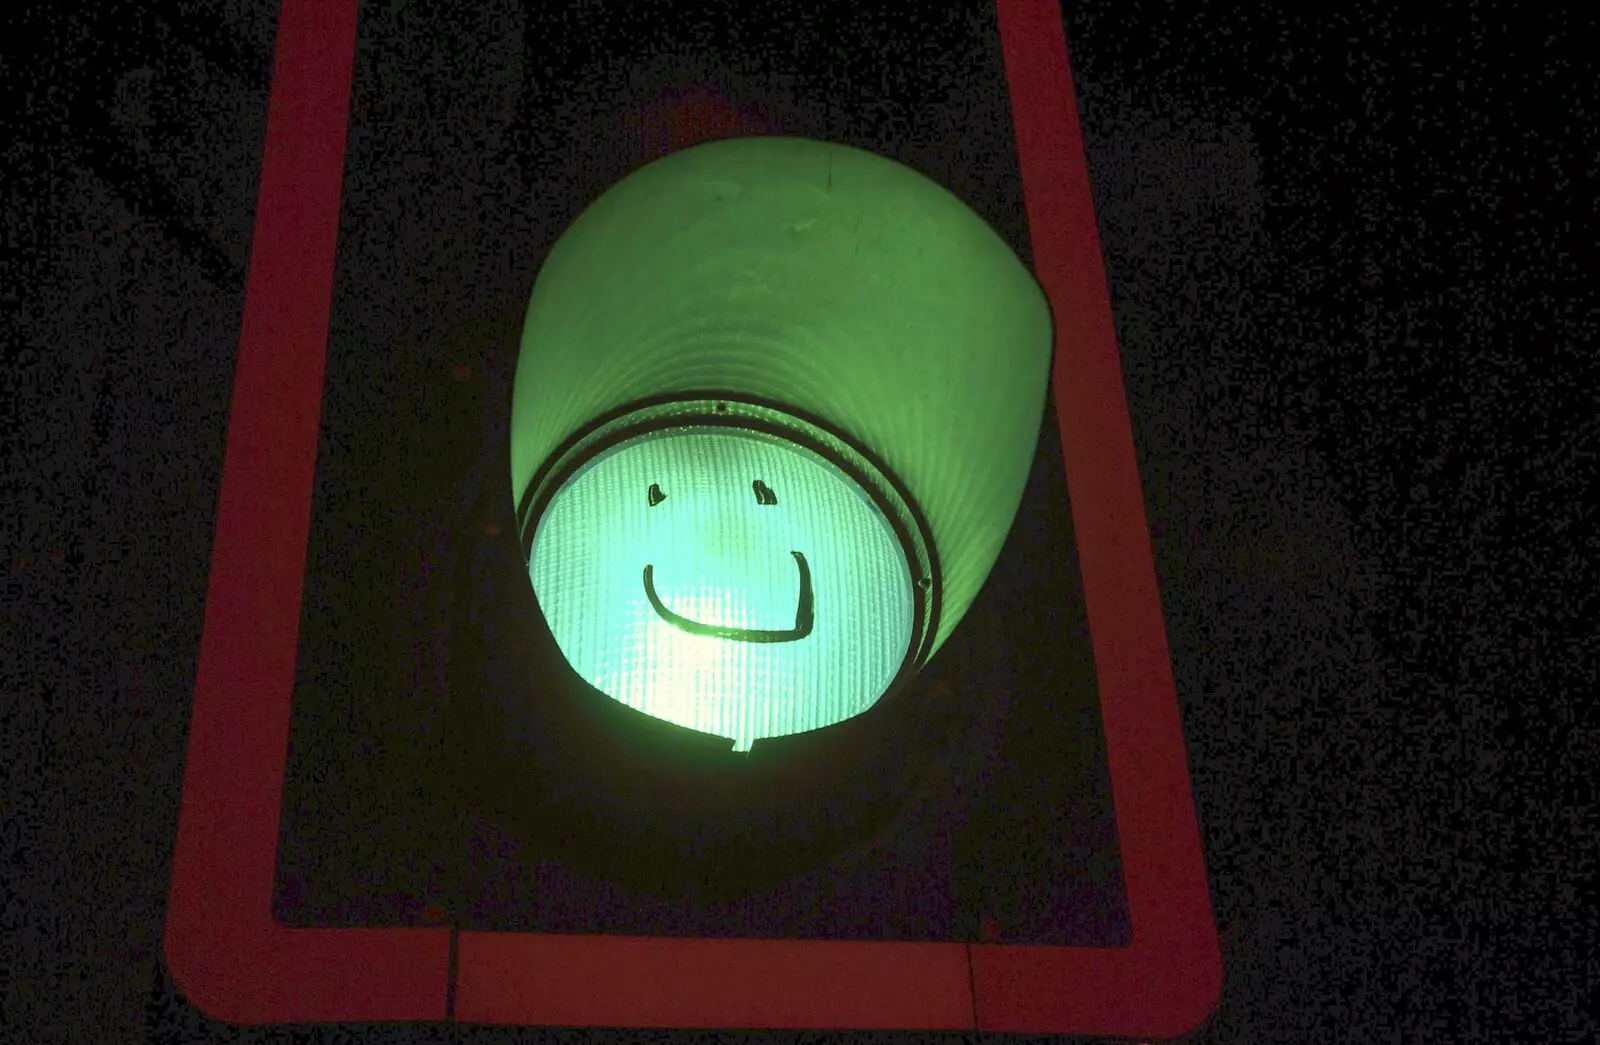 A smiley green traffic light, from A Night in the Salisbury Arms, Cambridge - 9th March 2007